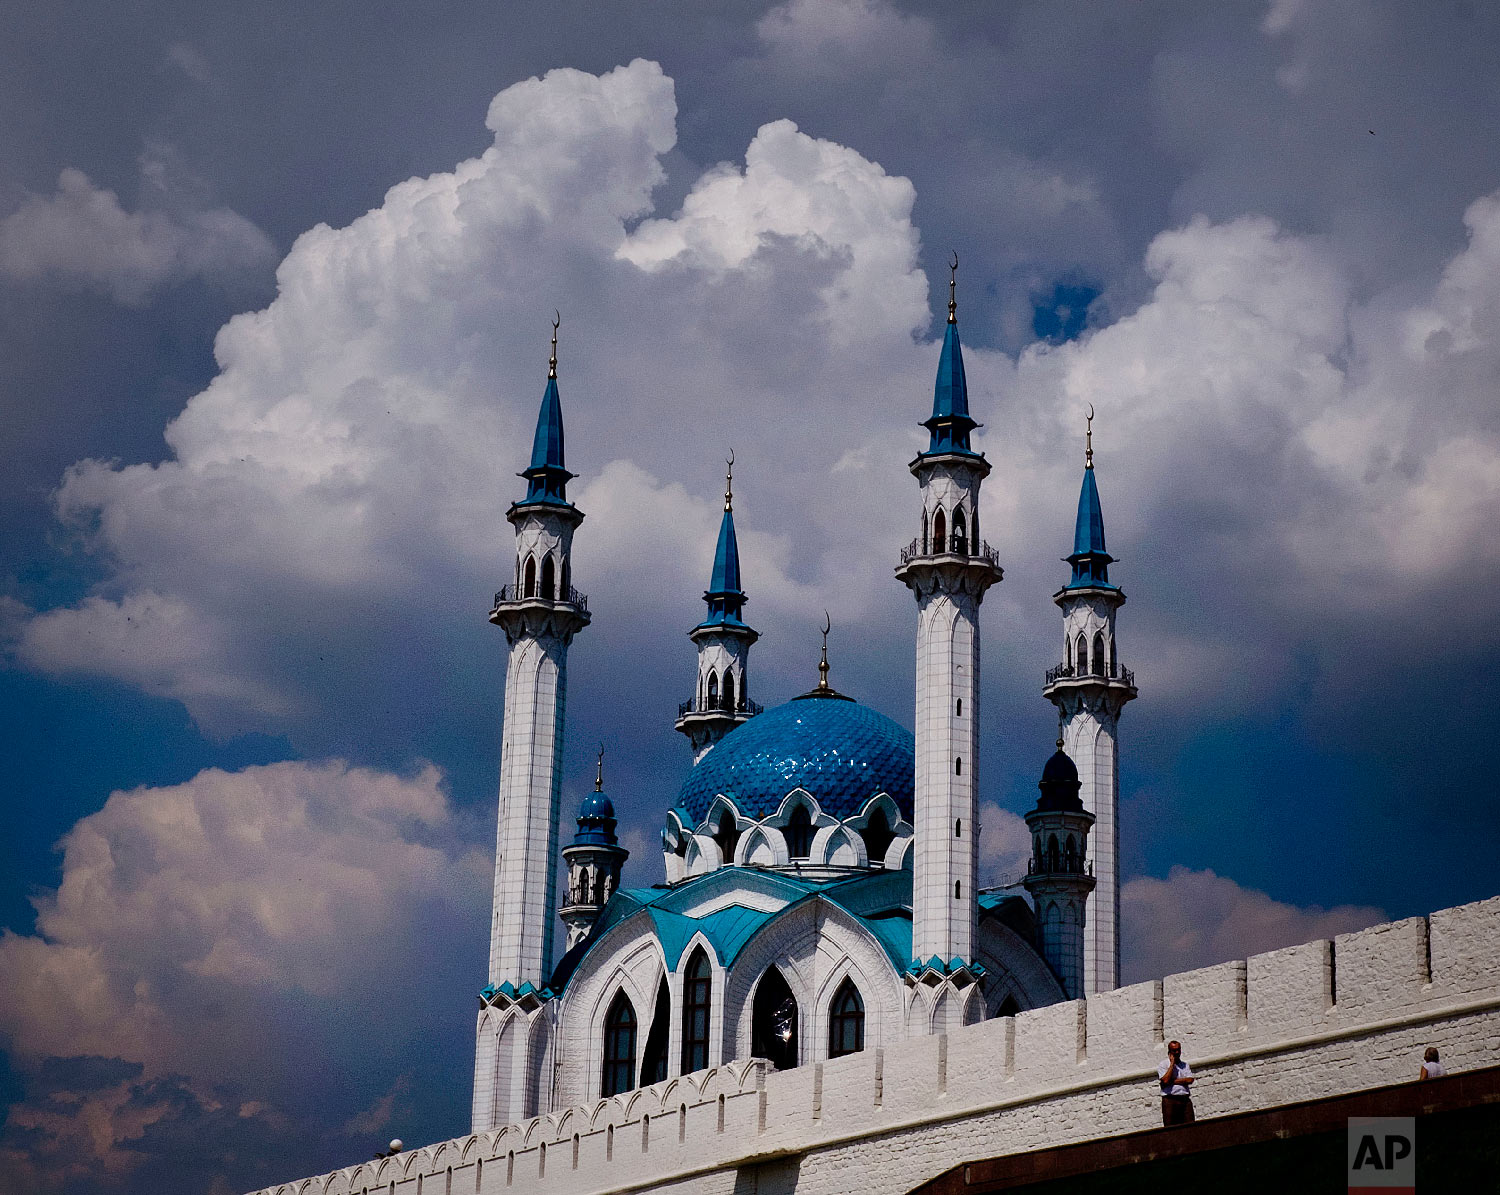  Clouds hang over the Grand Mosque of the Kremlin during the 2018 soccer World Cup in Kazan, Russia on June 26, 2018. (AP Photo/Michael Probst) 